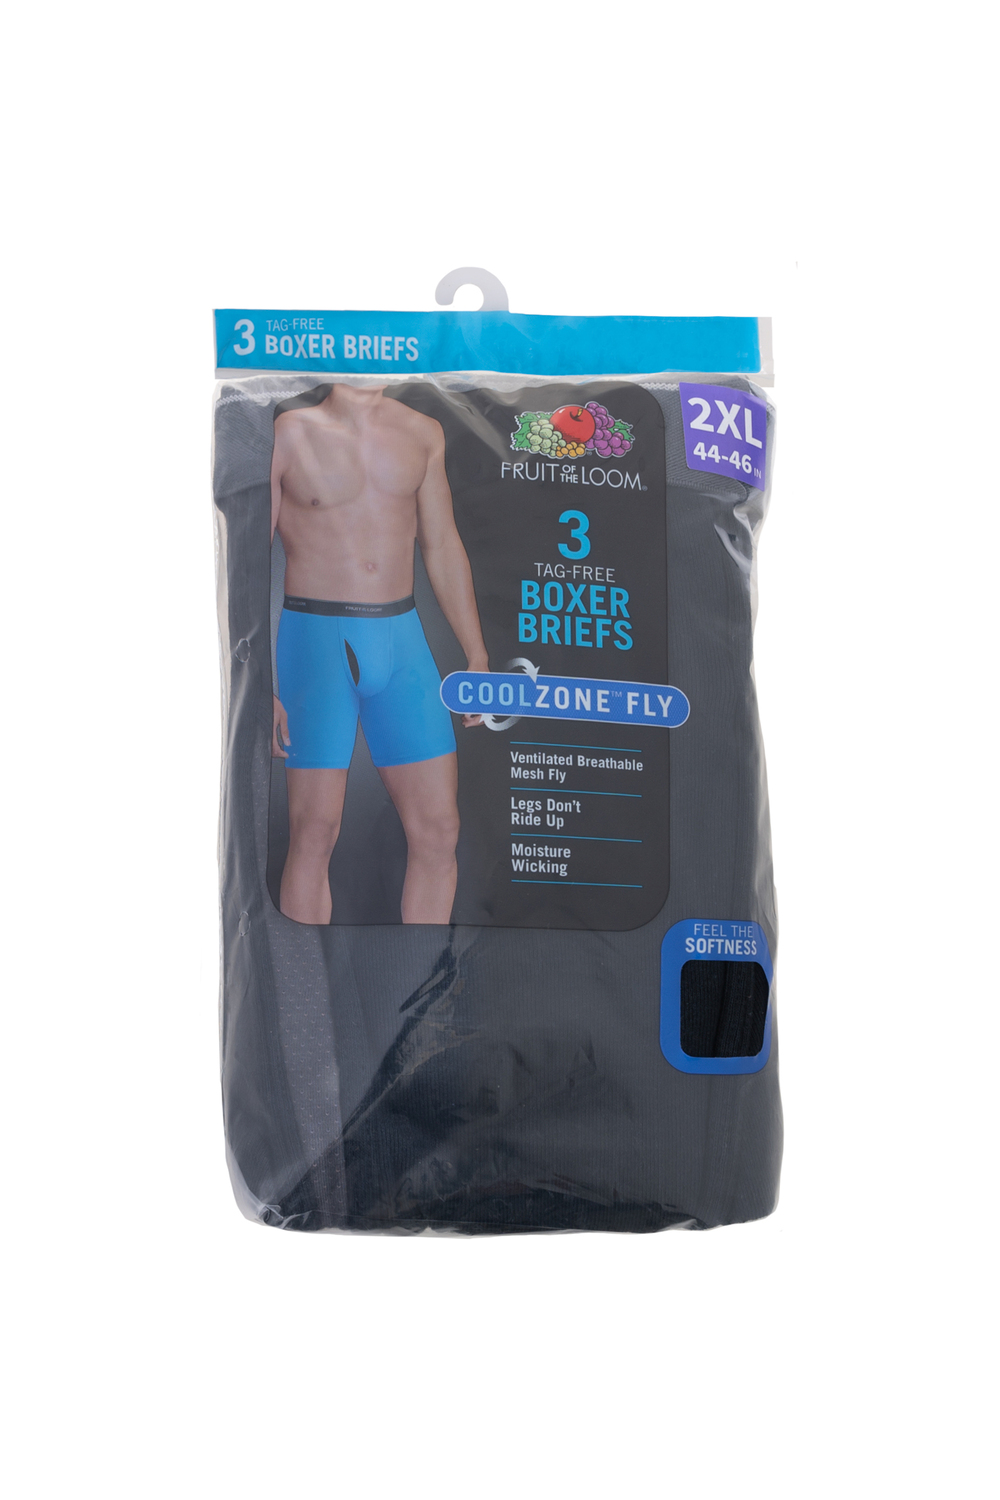 Fruit of the Loom - Tag-free CoolZone Fly boxer briefs, pk. of 3 - Plus  Size. Colour: black. Size: 2xl